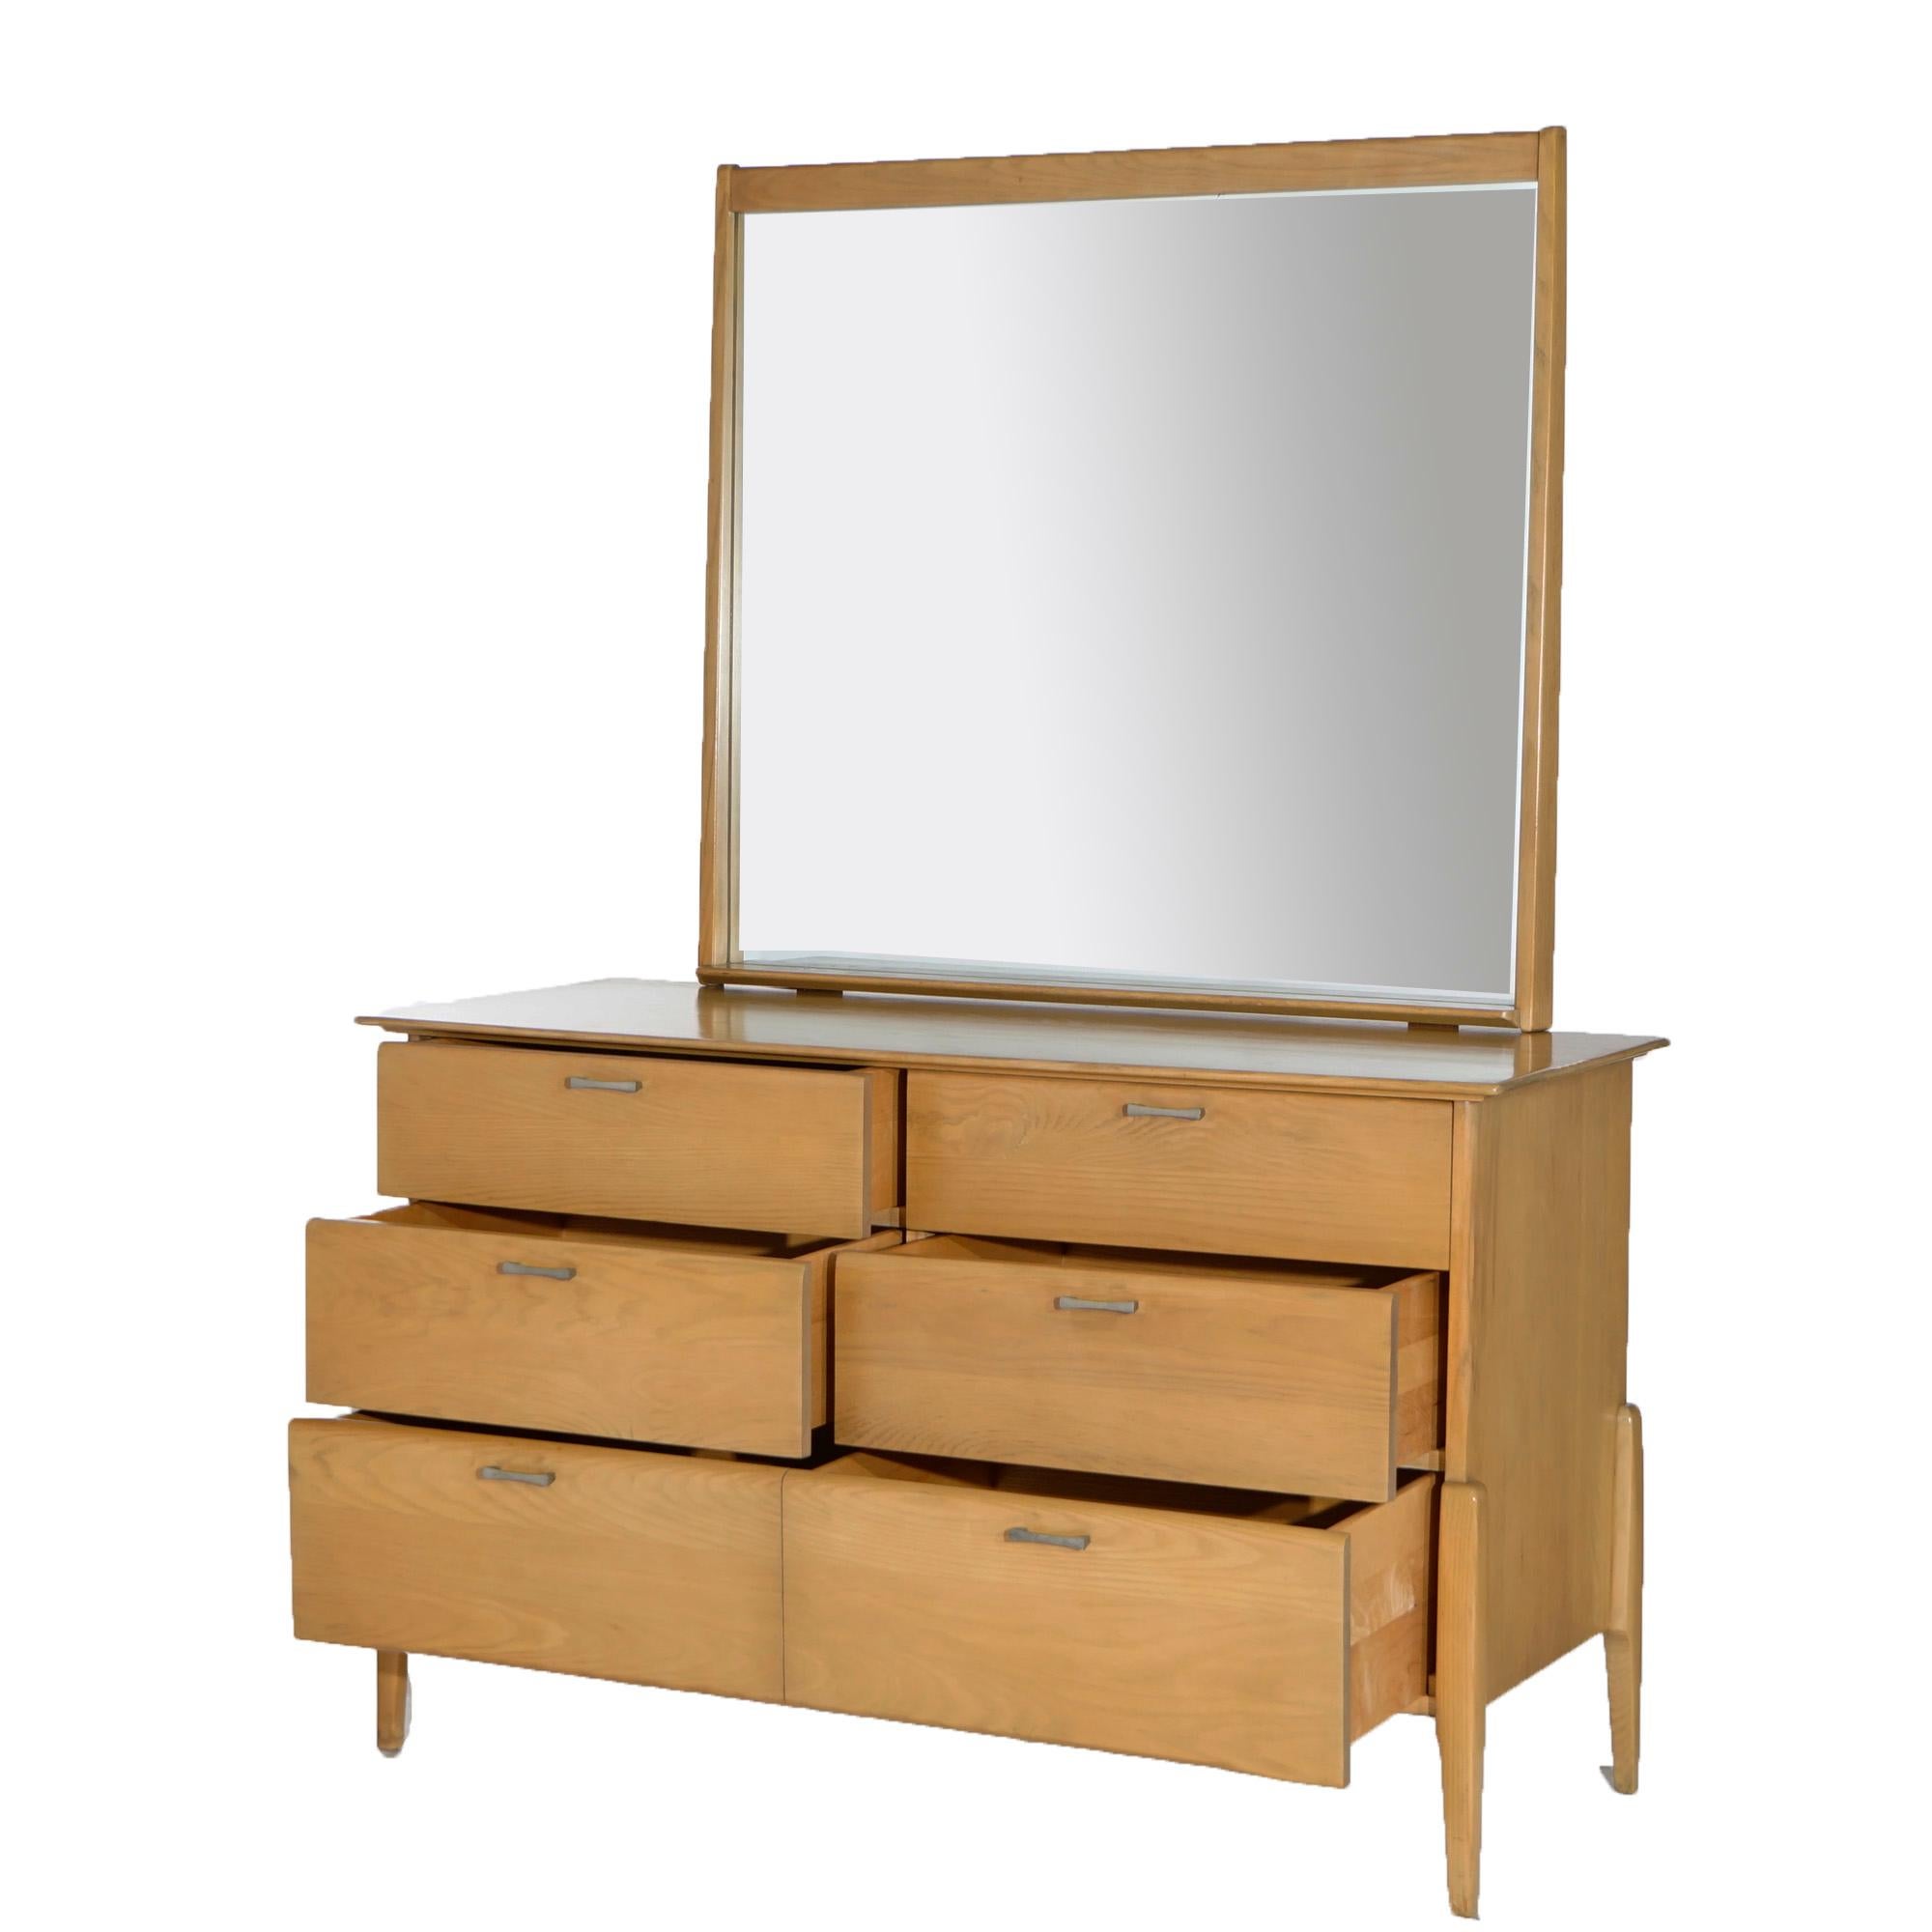 American Mid-Century Modern Heywood Wakefield Prophecy Dresser with Mirror in Fawn, C1950